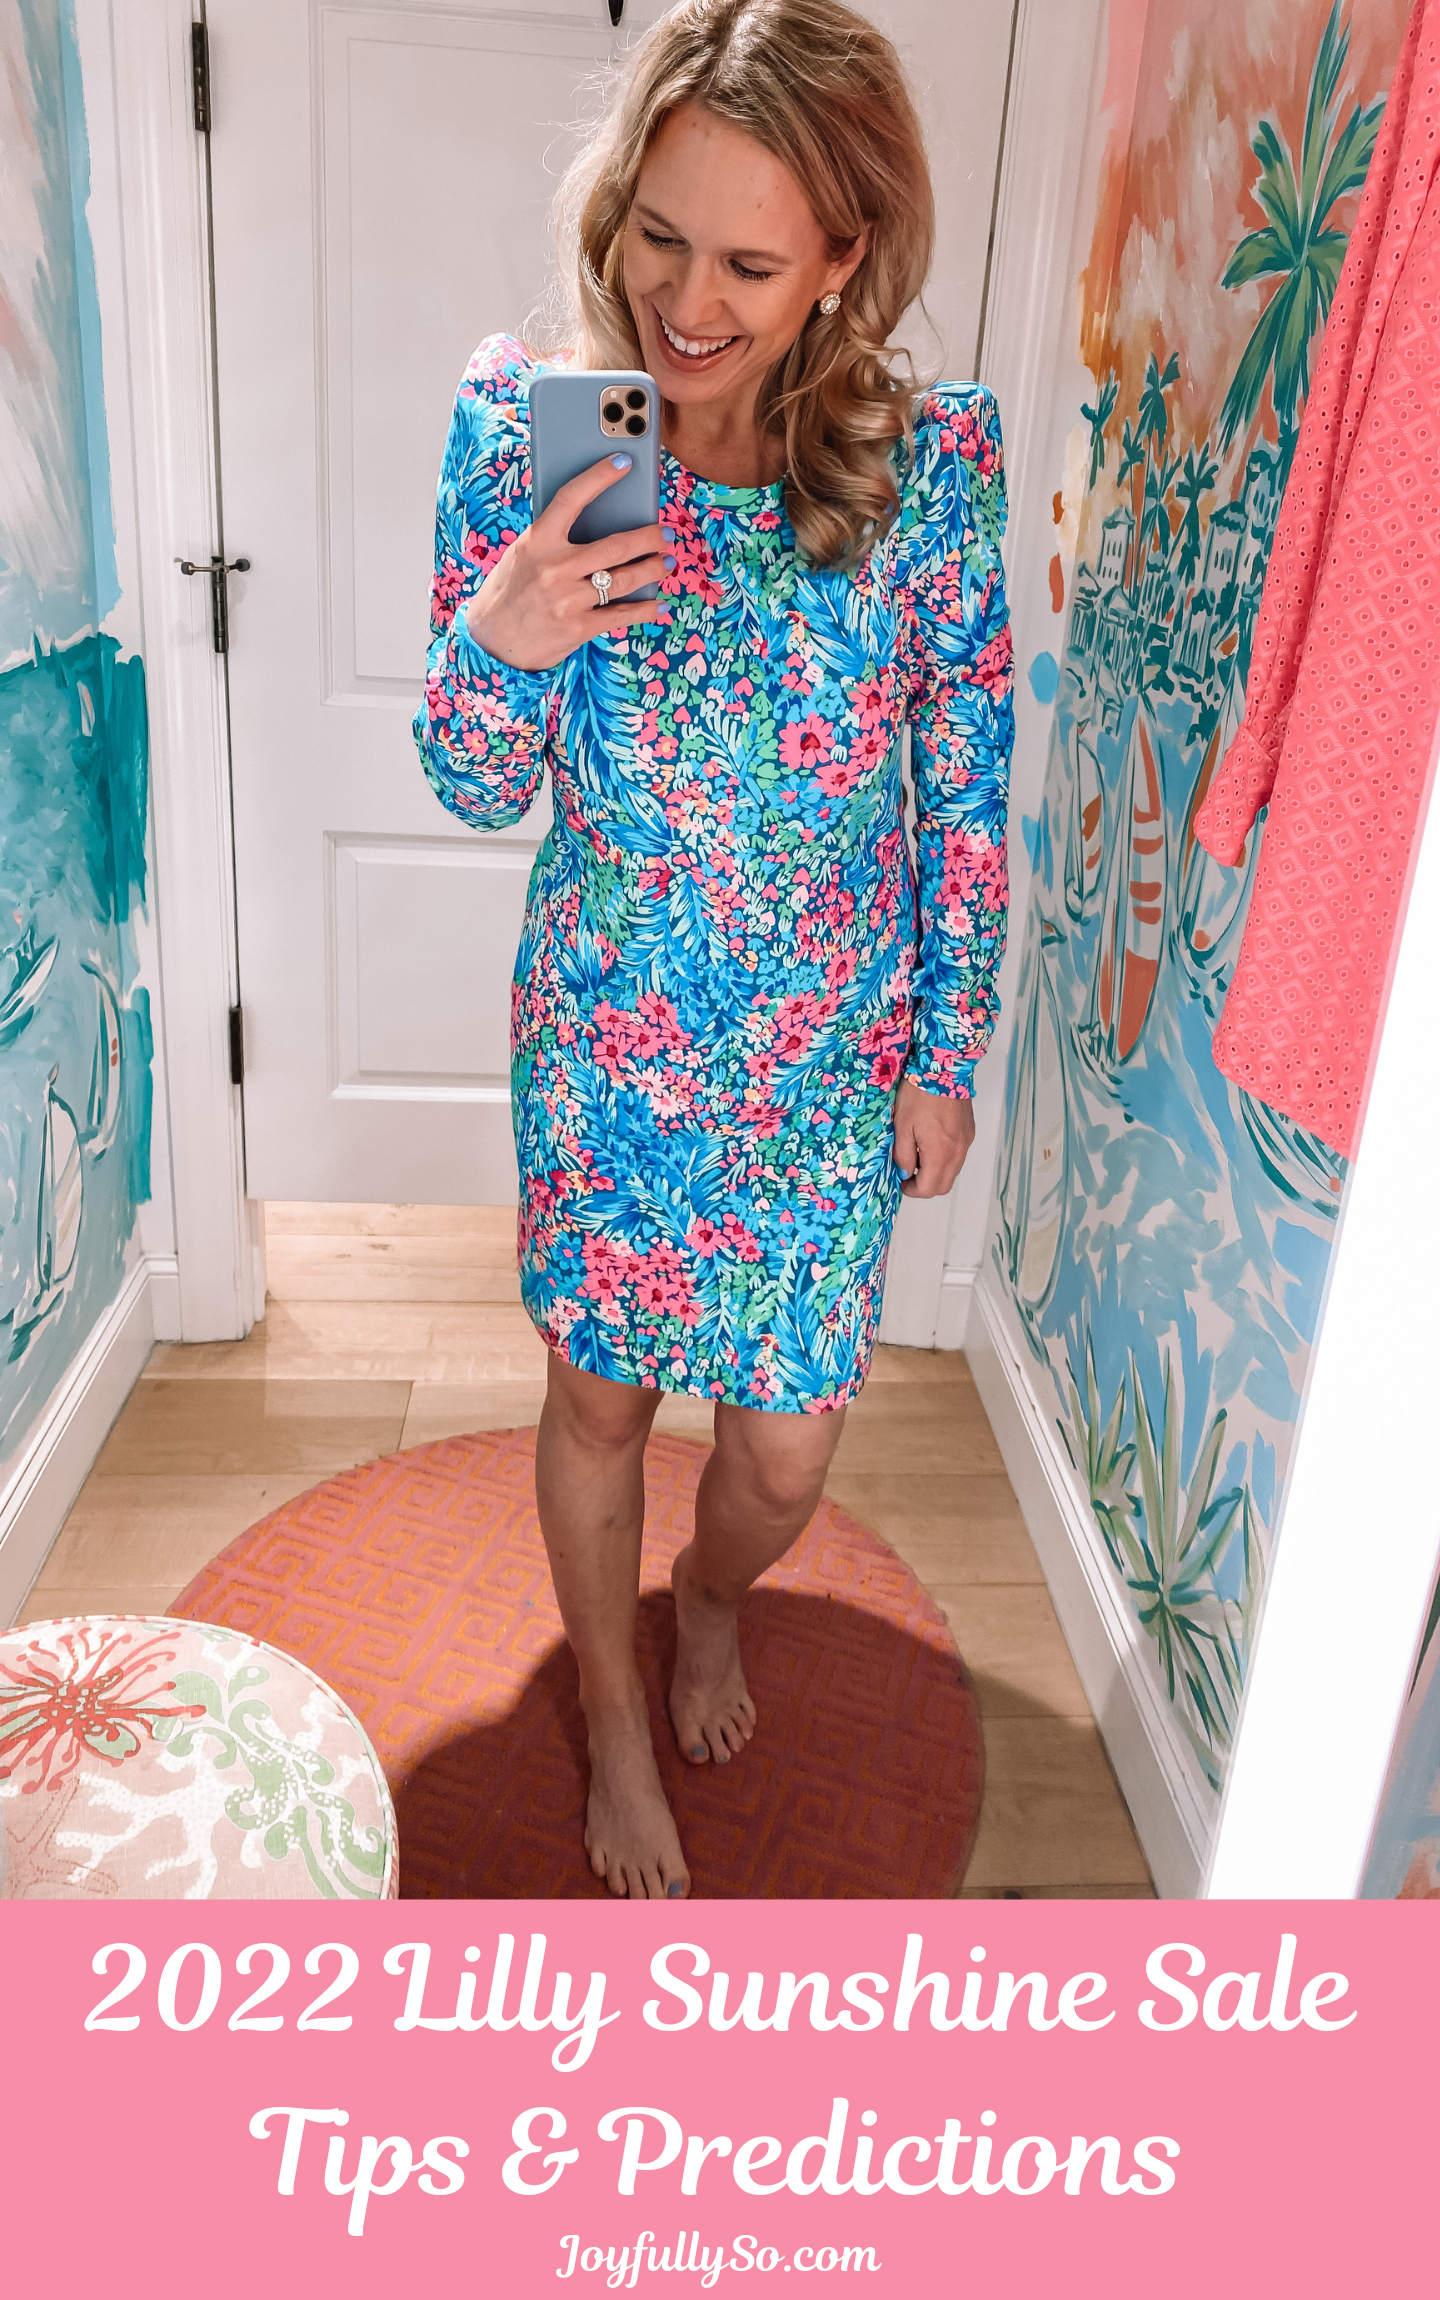 Lilly Sunshine Sale Summer 2022 predictions and tips